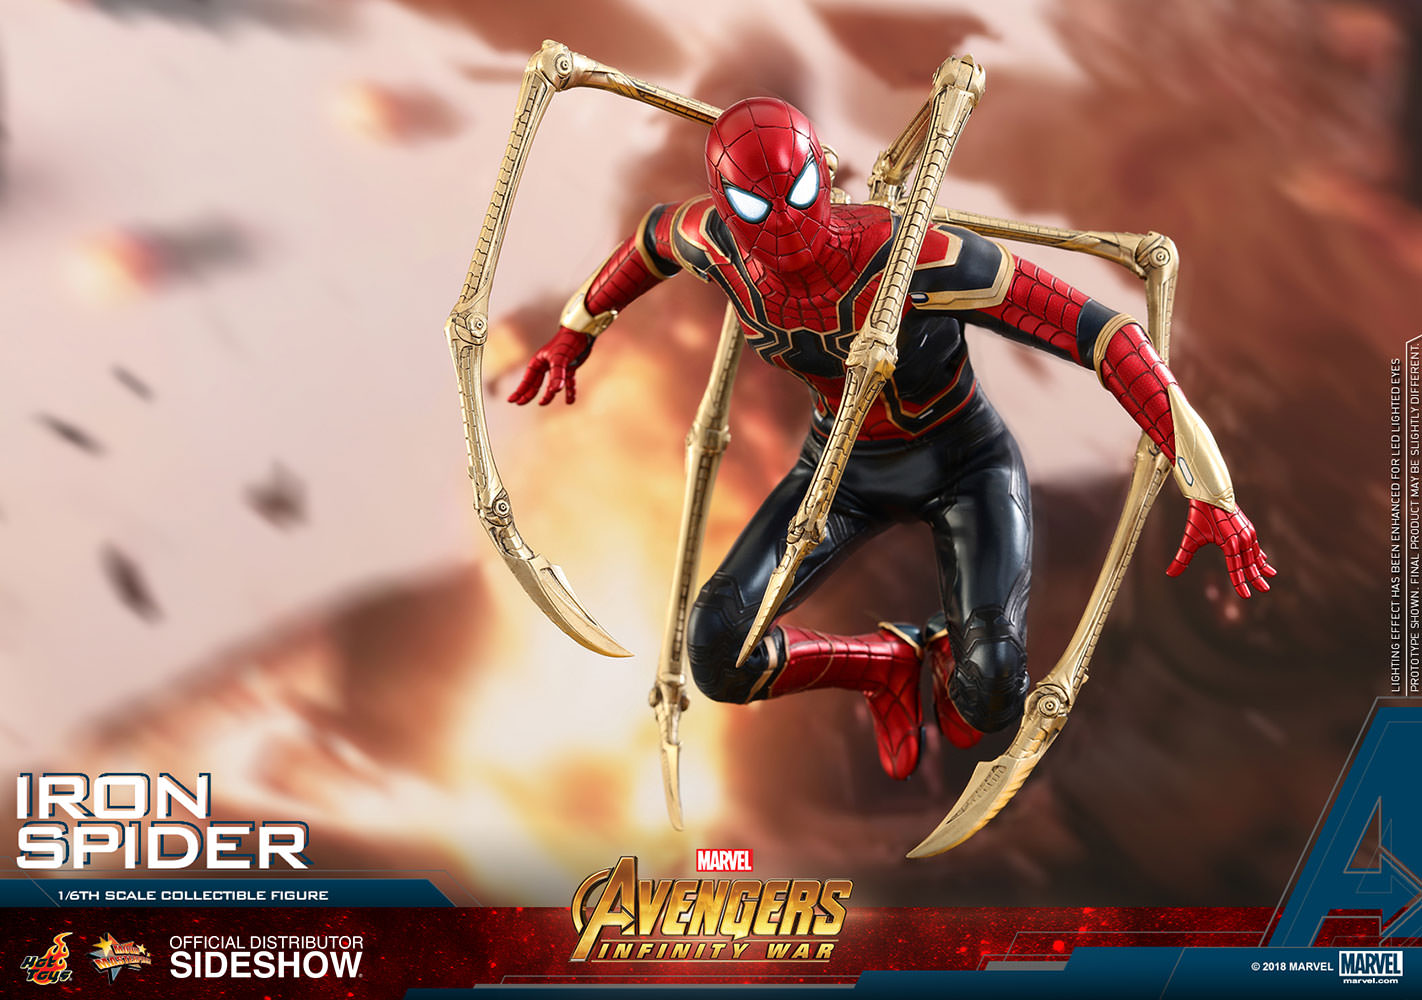 marvel-avengers-infinity-war-iron-spider-sixth-scale-hot-toys-903471-17